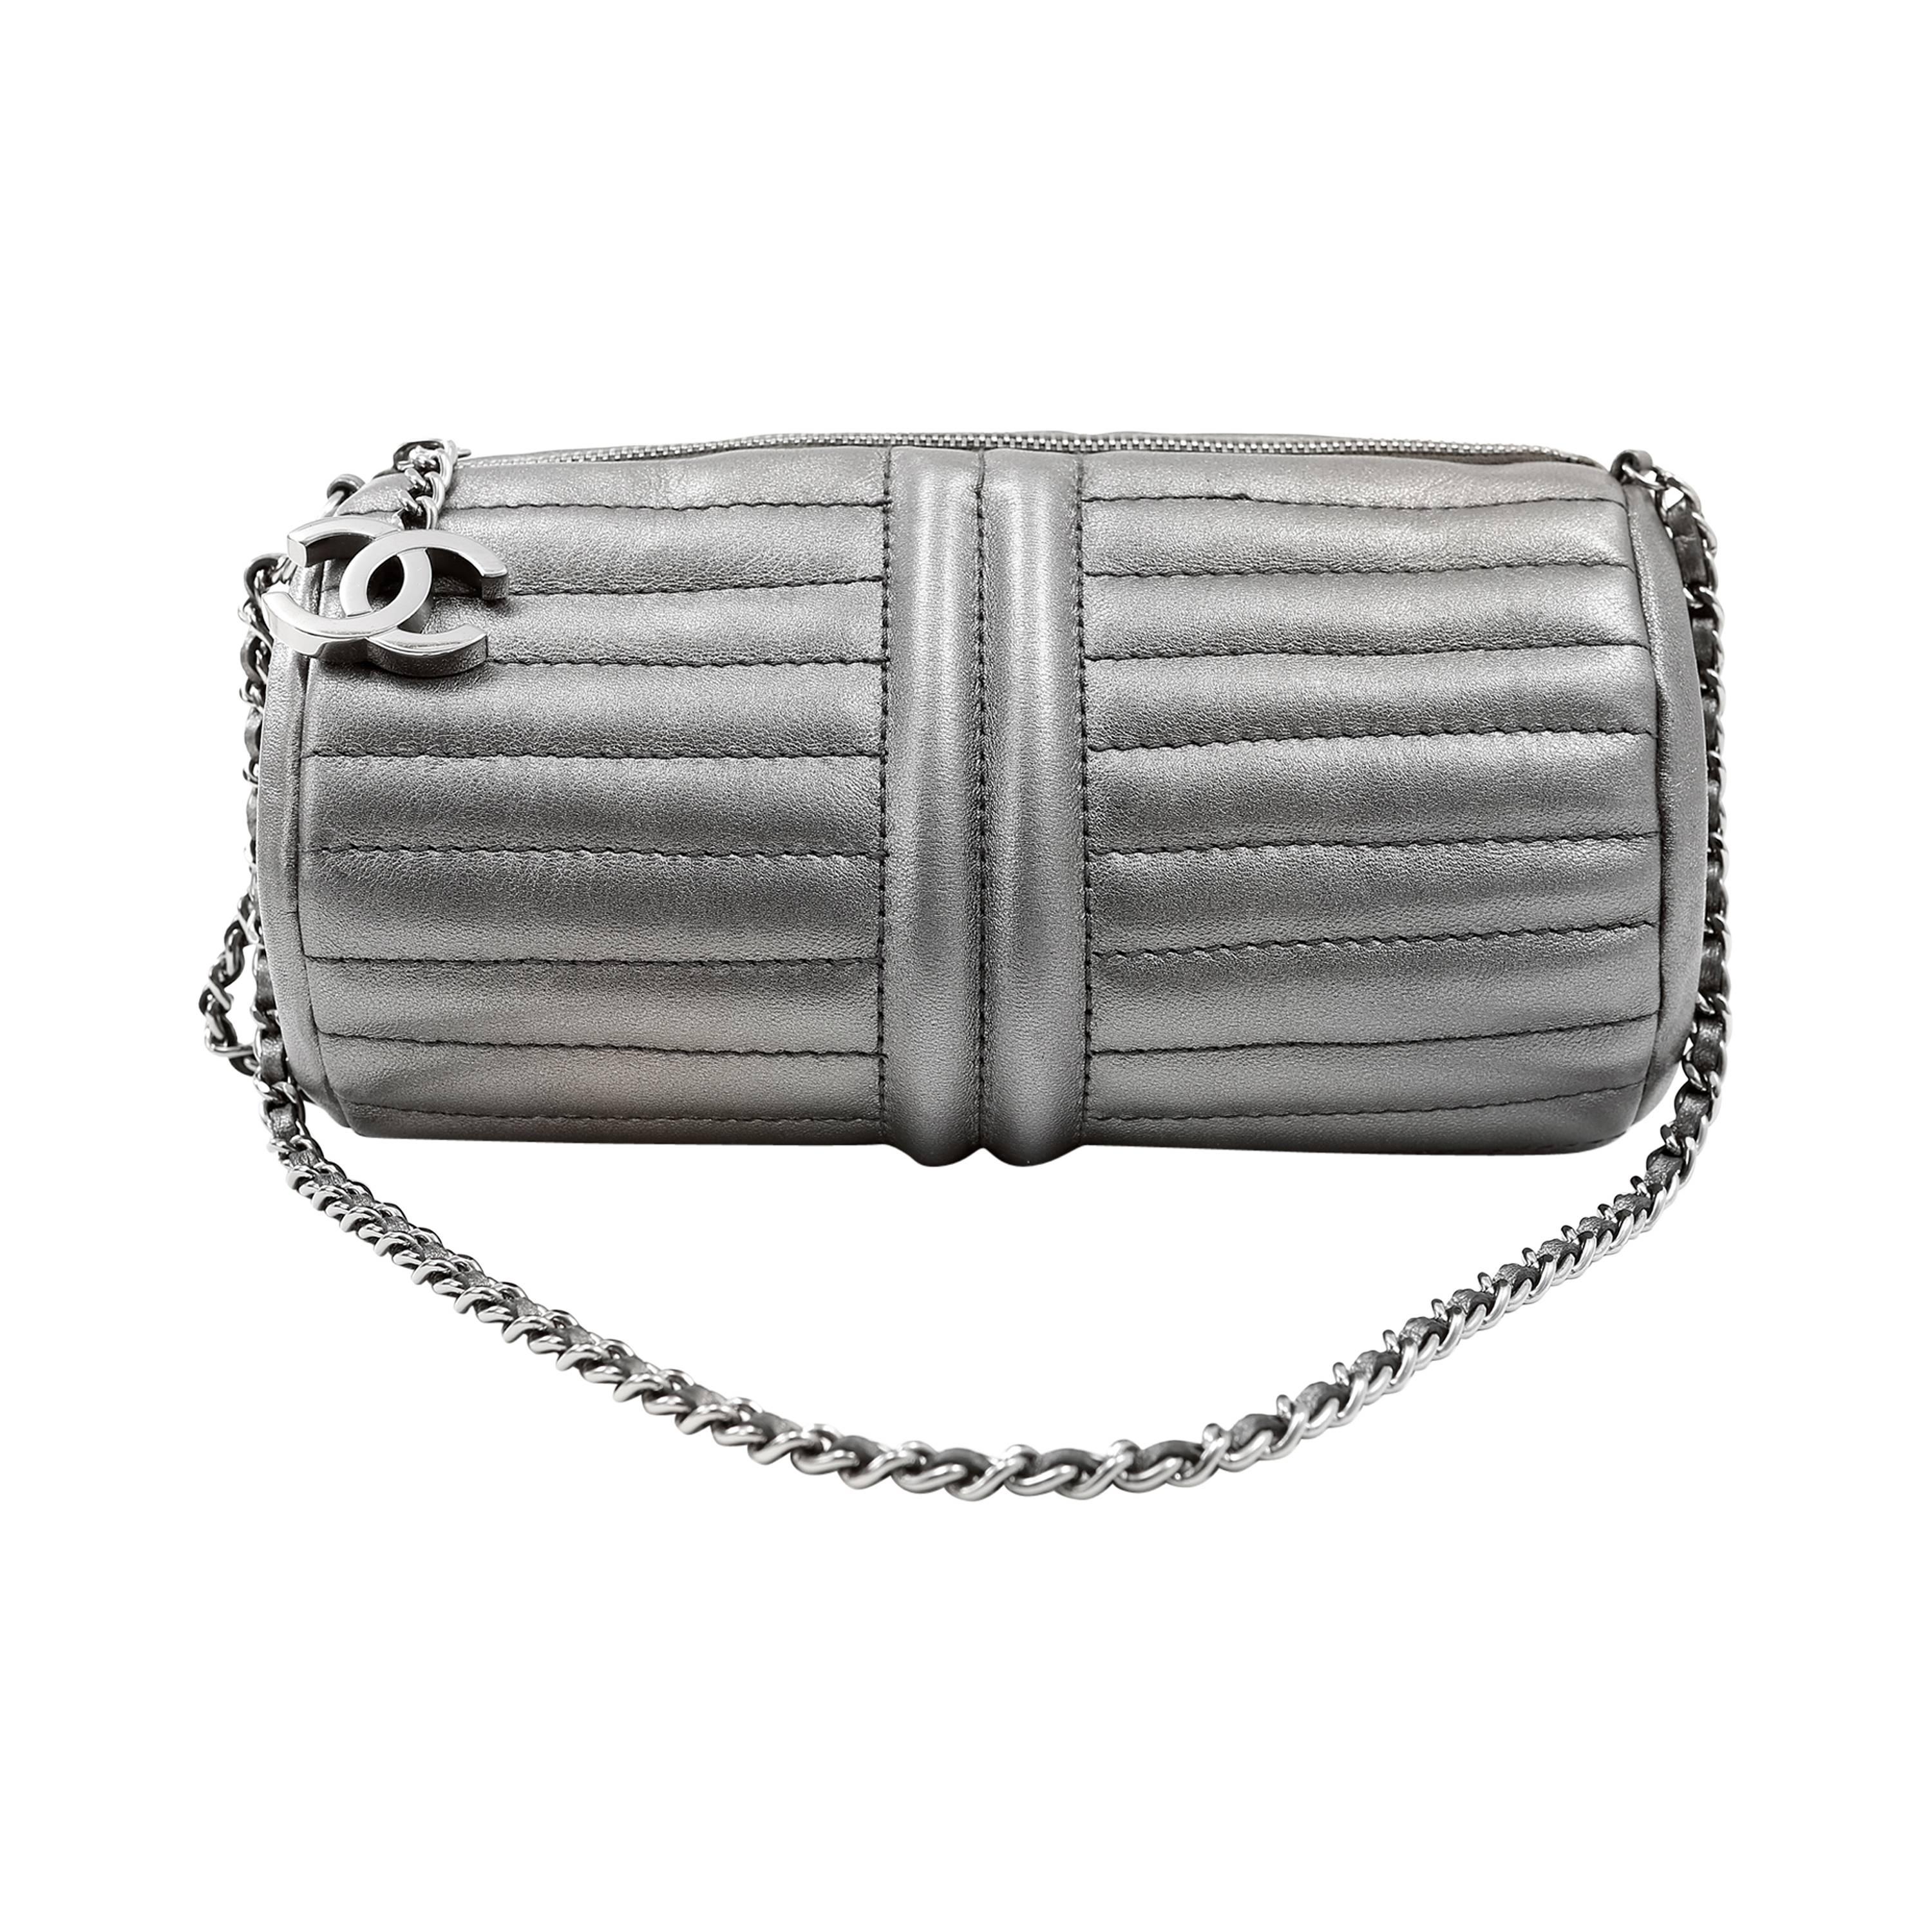 Chanel Vintage Pewter Leather Duffle Style Bag